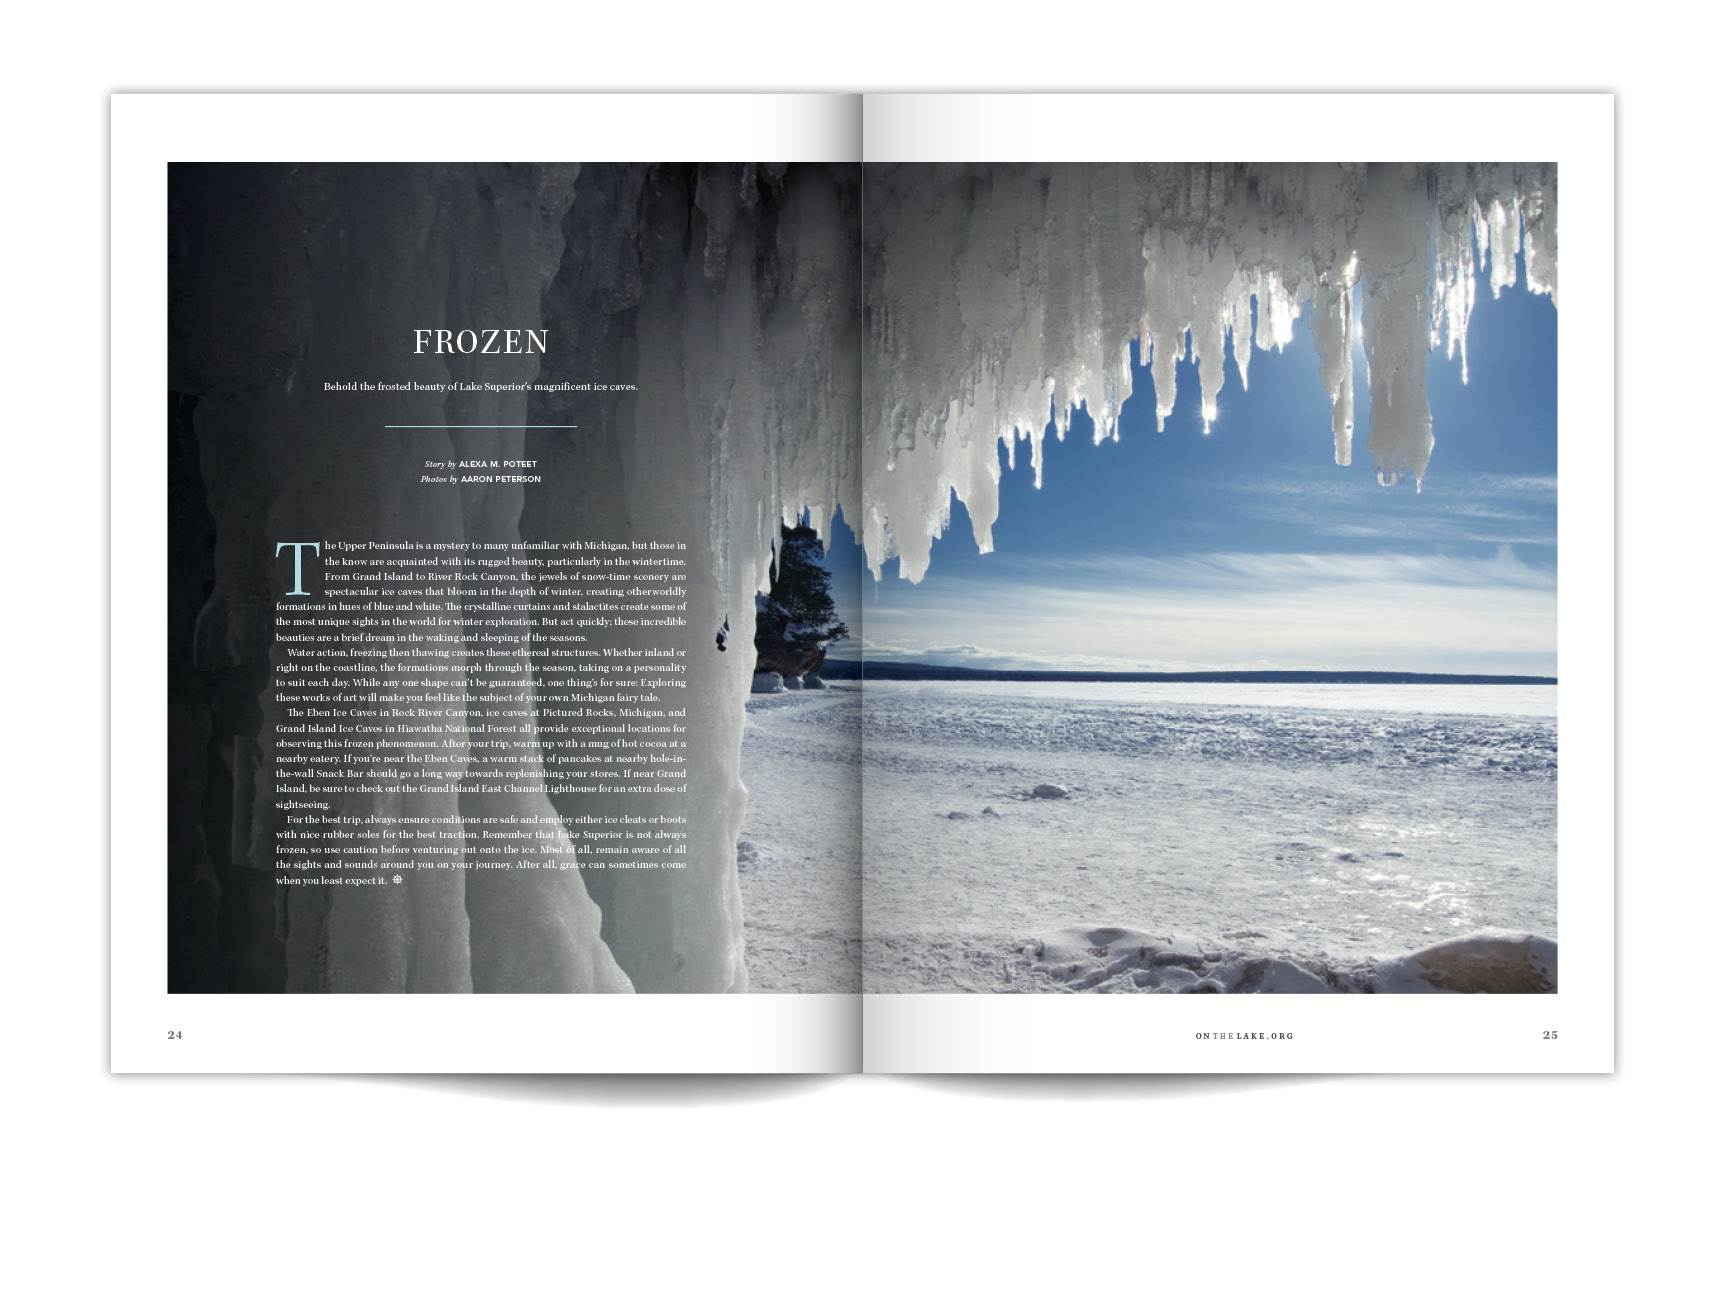  Feature article in the Winter 2015 issue of  ON THE LAKE  about the beautiful ice caves all over Michigan.&nbsp; 